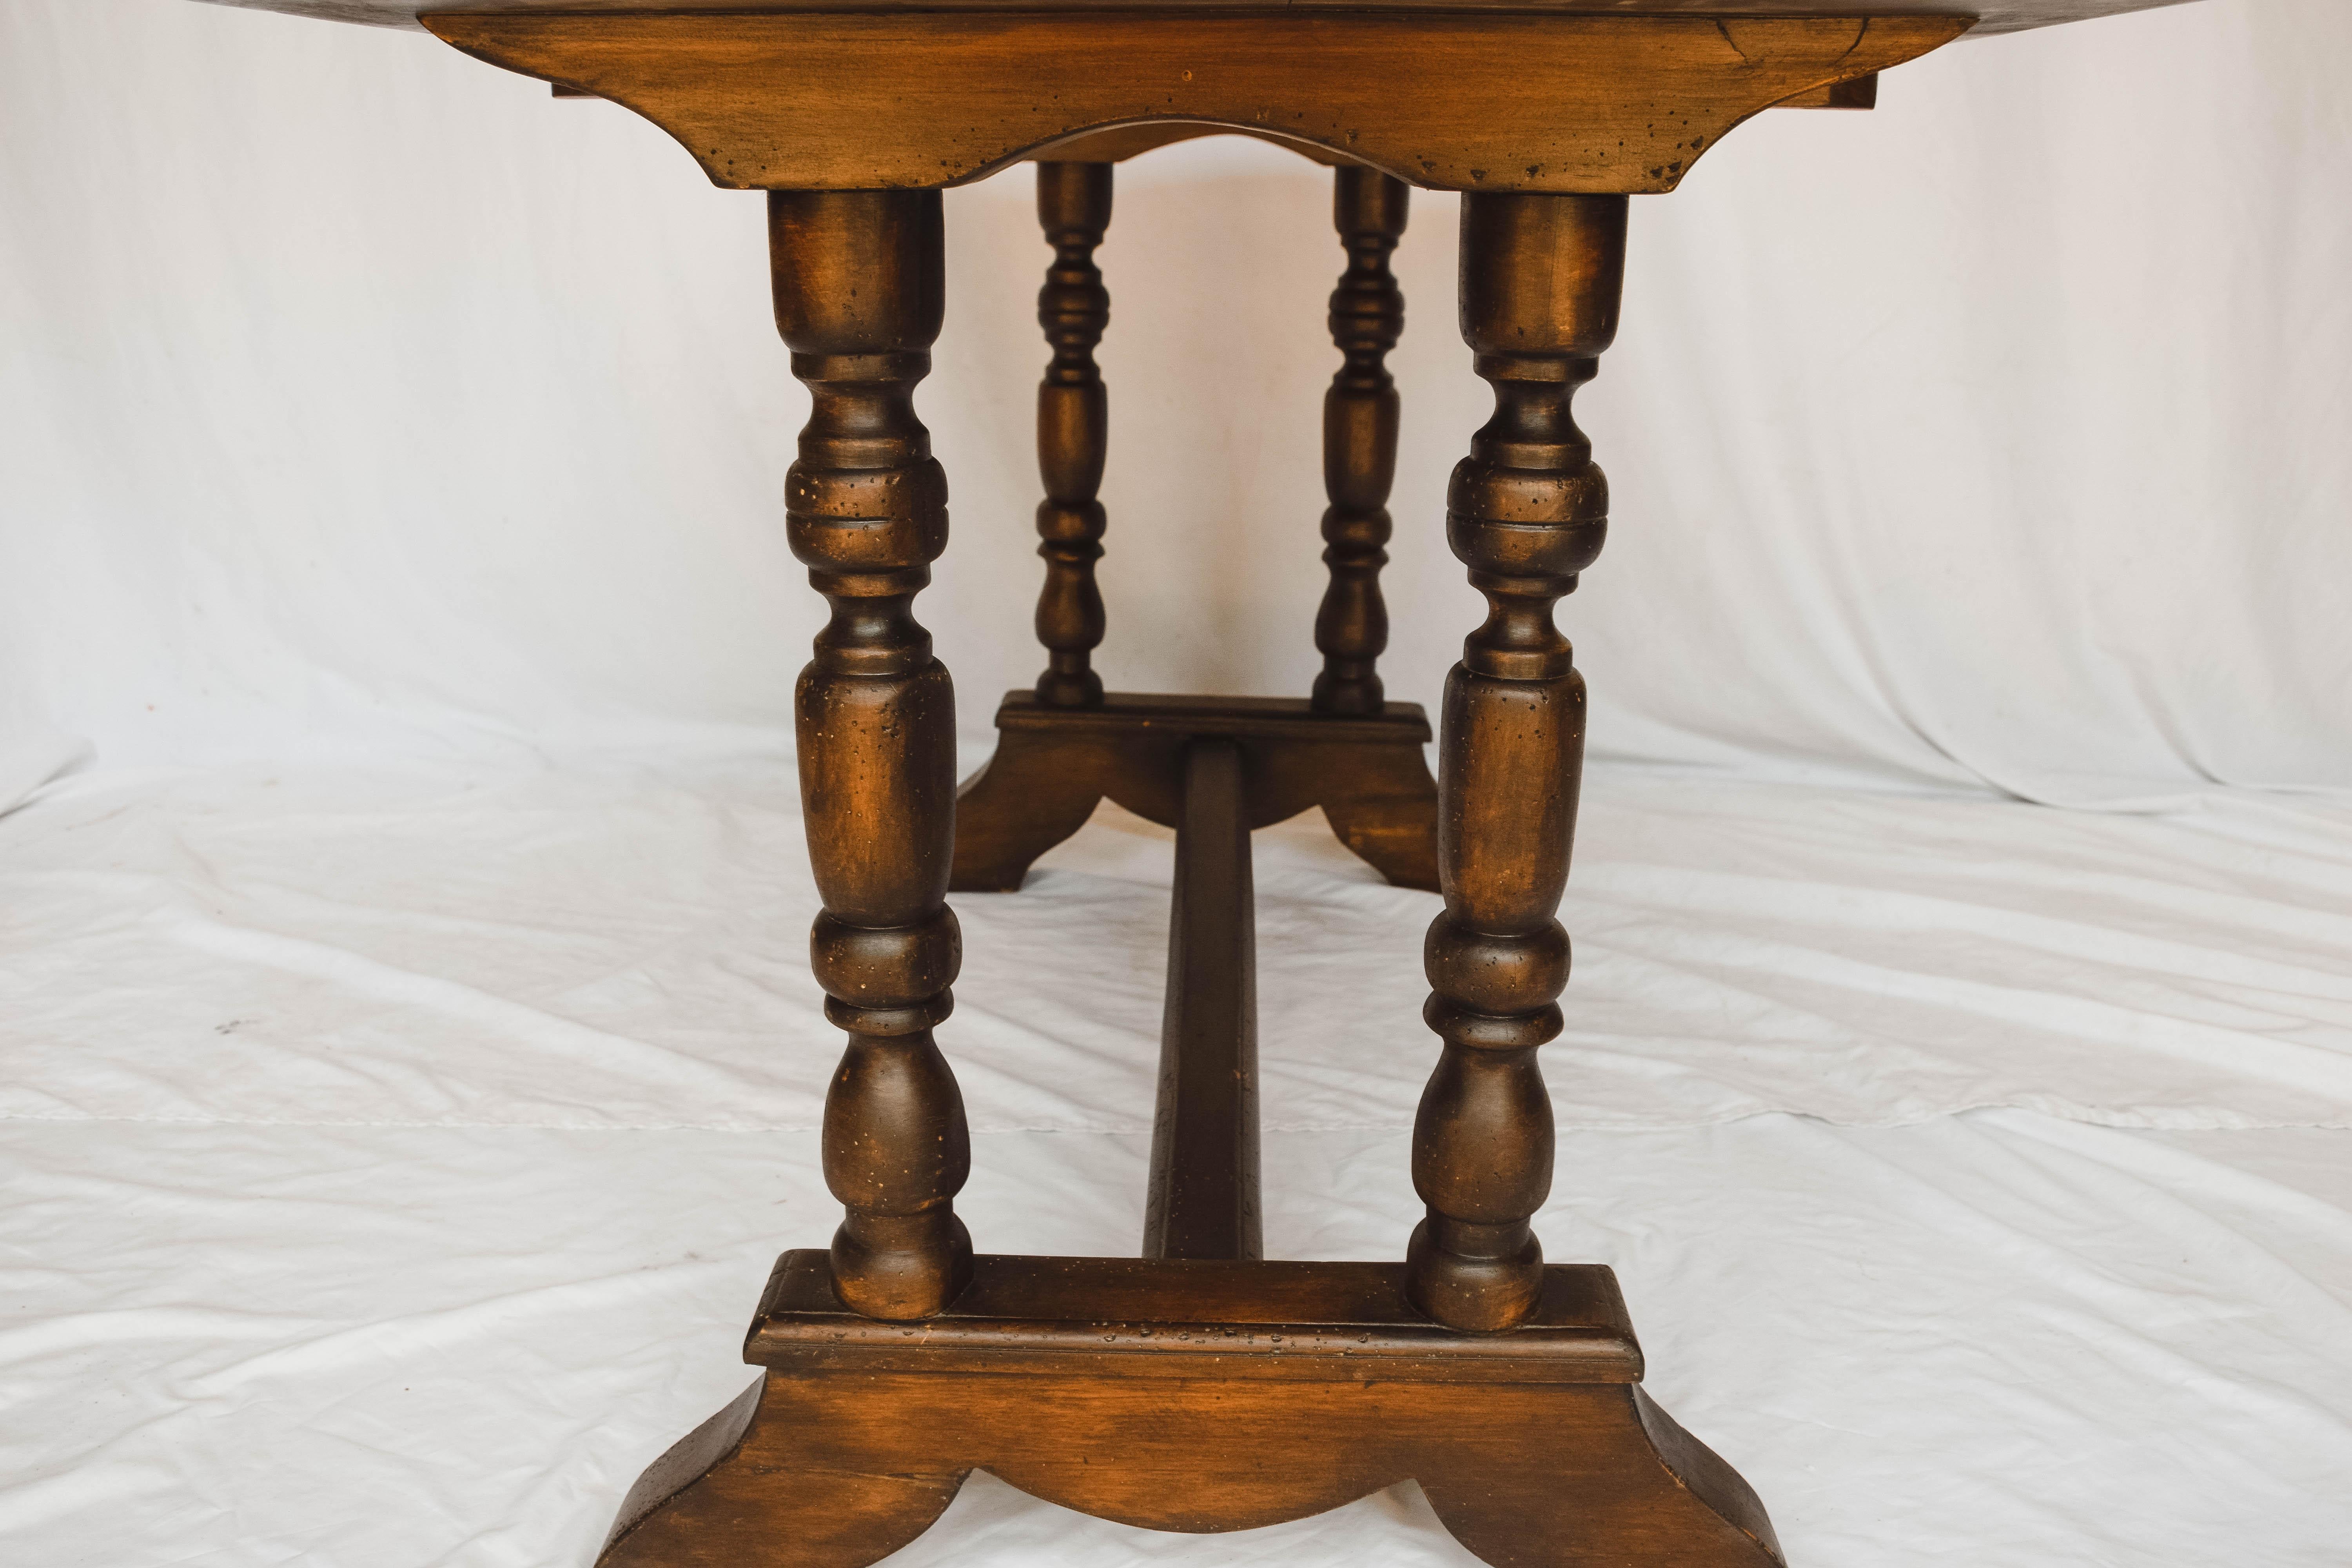 Fantastic wood console table with with trestle base and turned legs. This table finished in a dark stain and would be perfect in an entry. It could also be used as a game table or a perfect place to do a puzzle.